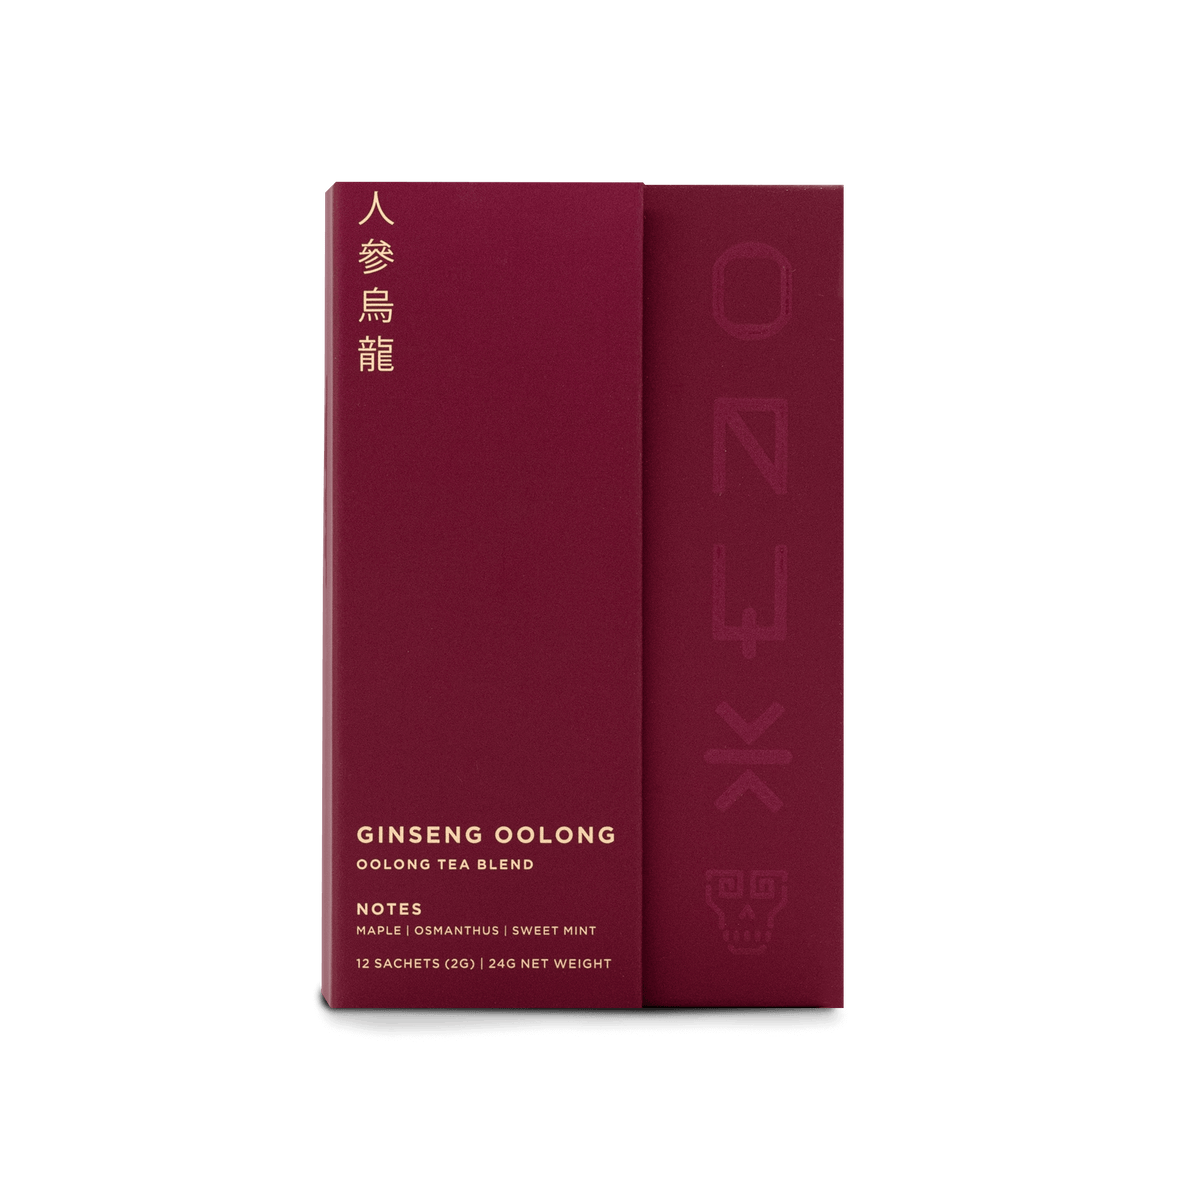 Ginseng Oolong by Onyx Coffee Lab